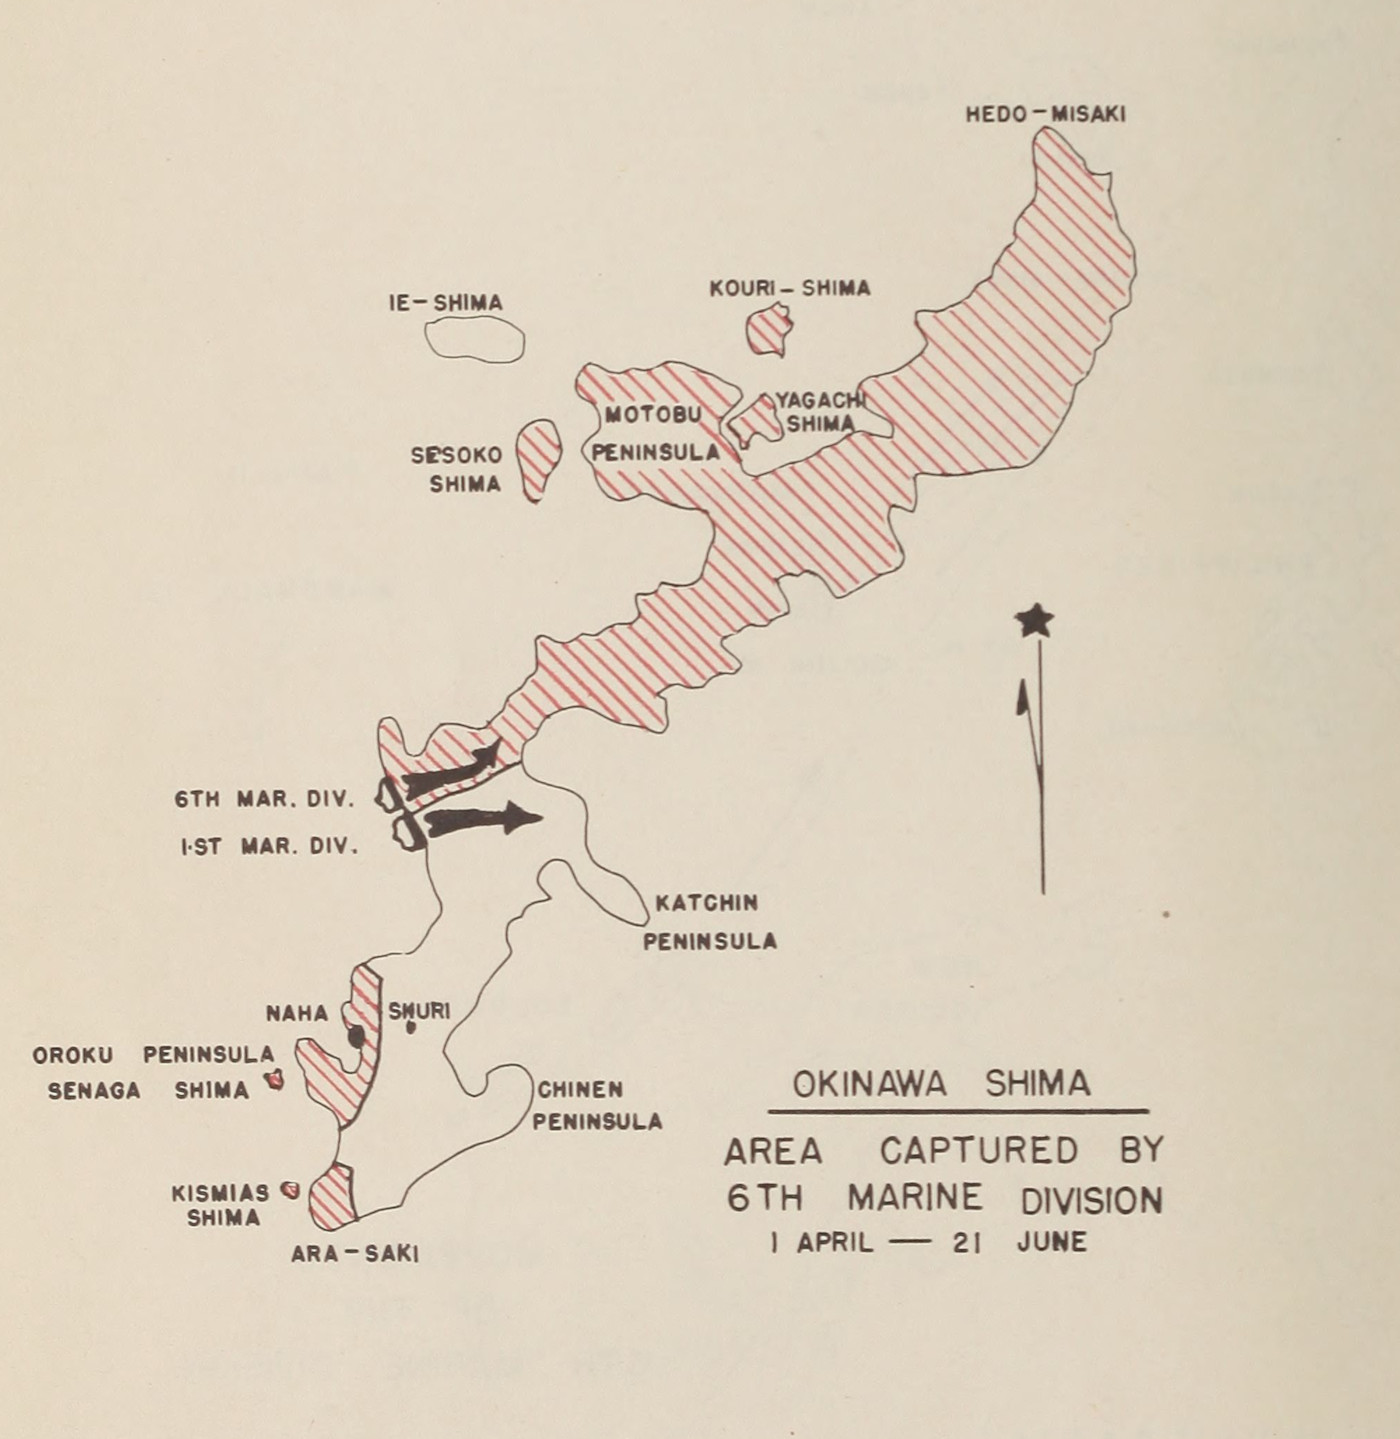 Map 2. Okinawa Shima. Area Captured by 6th Marine Division.